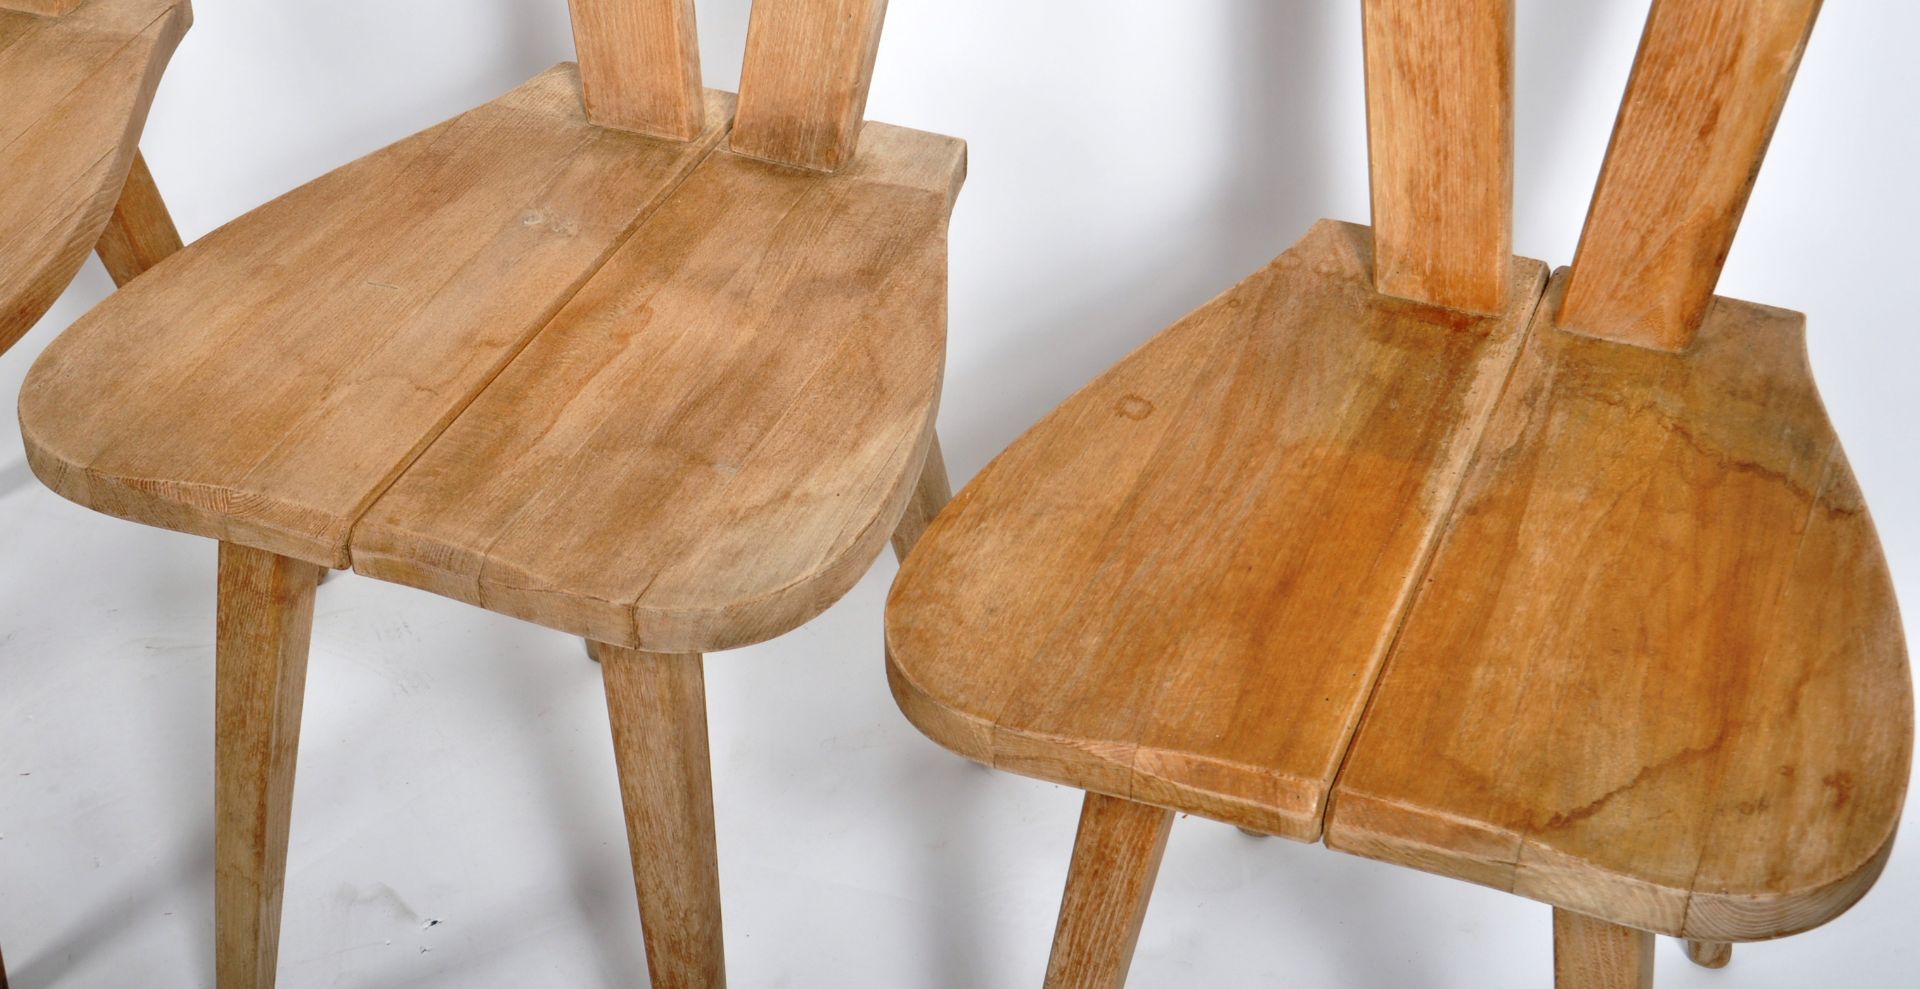 ZYDEL BY WINCZE & SZLEKYS - SET OF FOUR DINING CHAIRS - Image 4 of 7